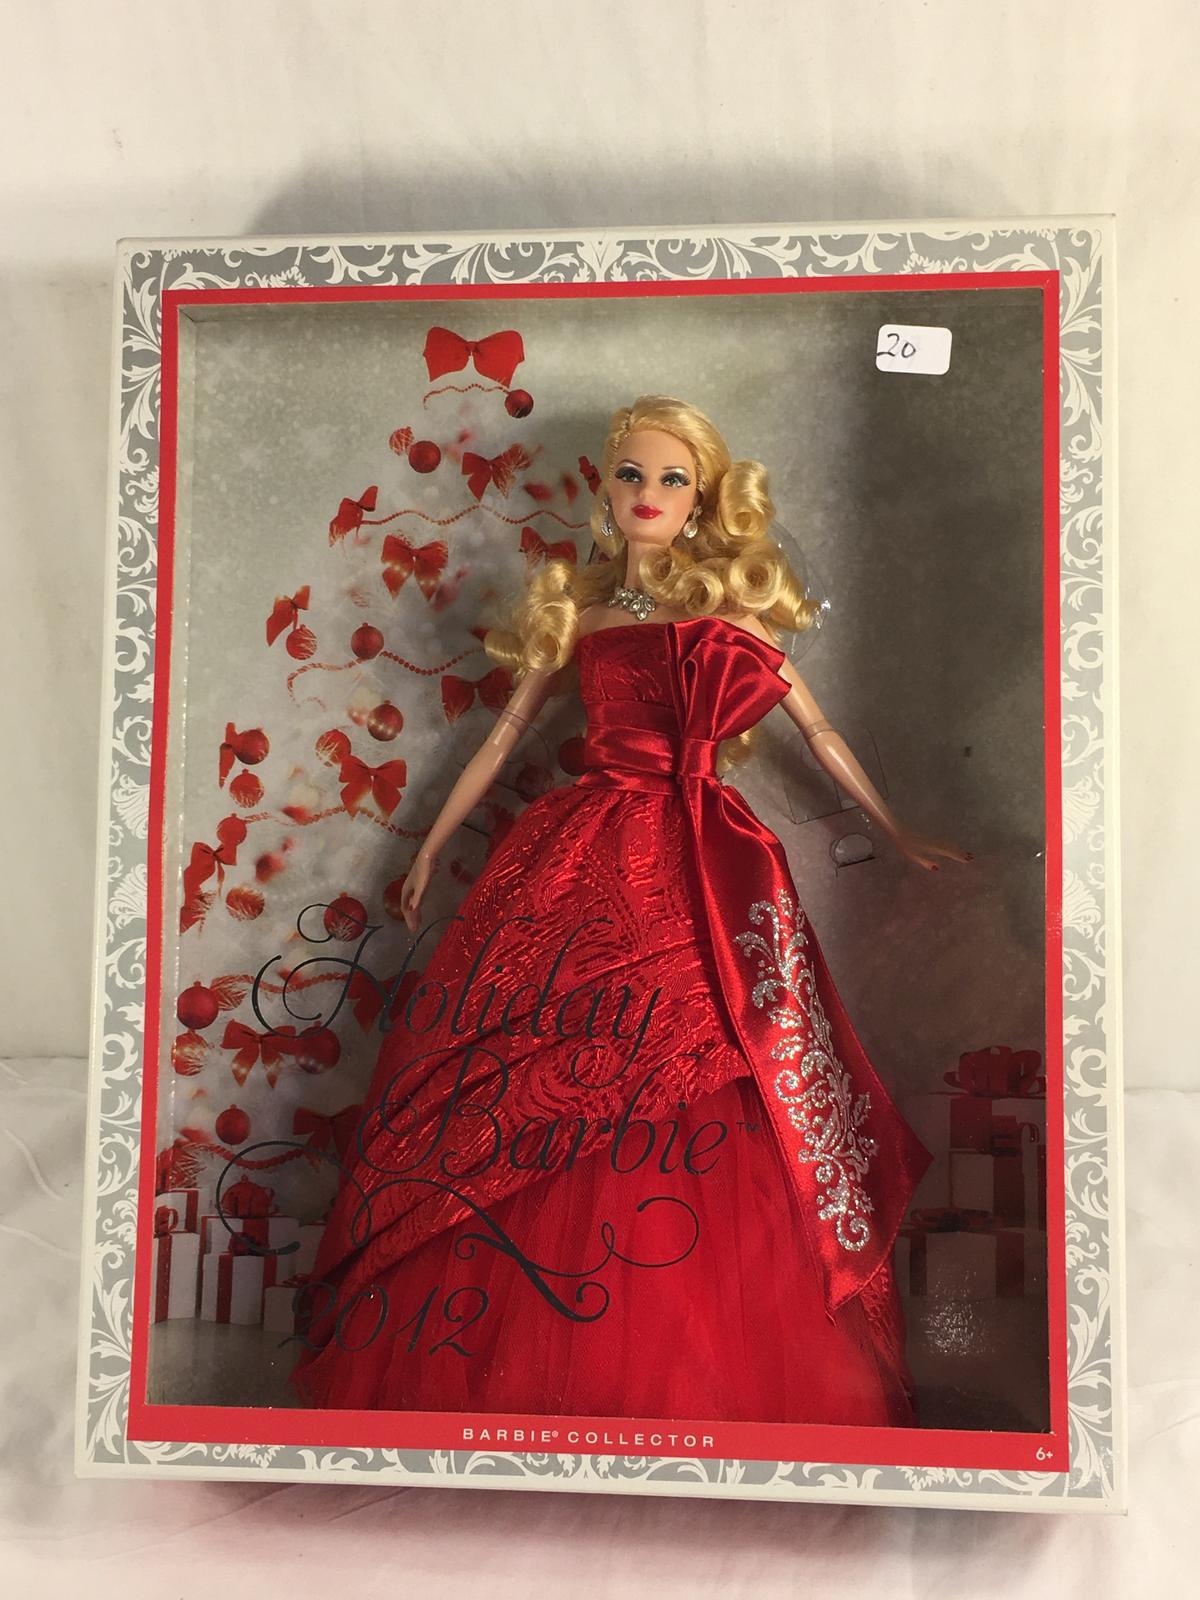 Collector NIP 2012 Mattel Holiday Celebration Barbie Doll 11-12" Tall Doll - See Pictures